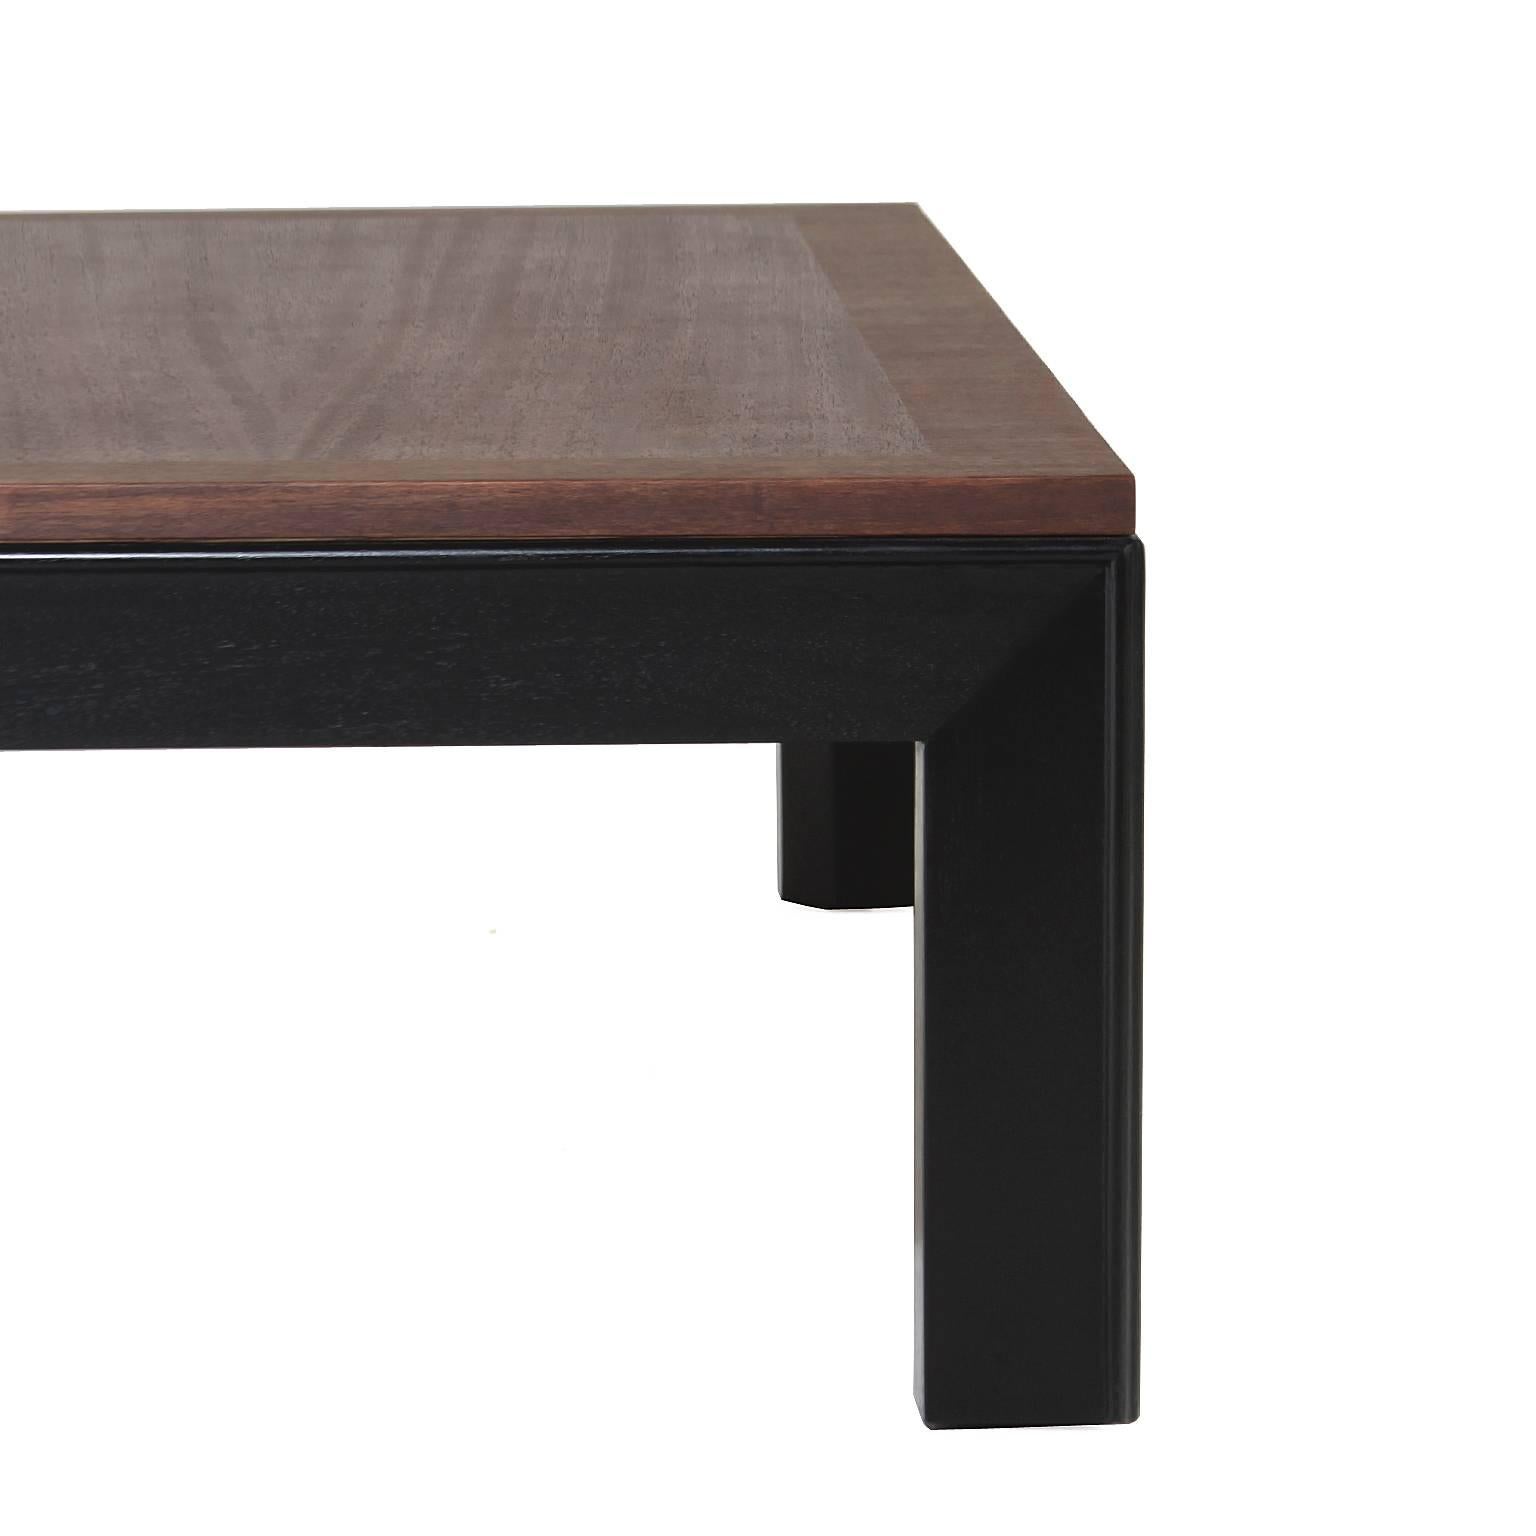 Widdicomb Mahogany and Black Lacquer Long Coffee Table  In Good Condition For Sale In Los Angeles, CA